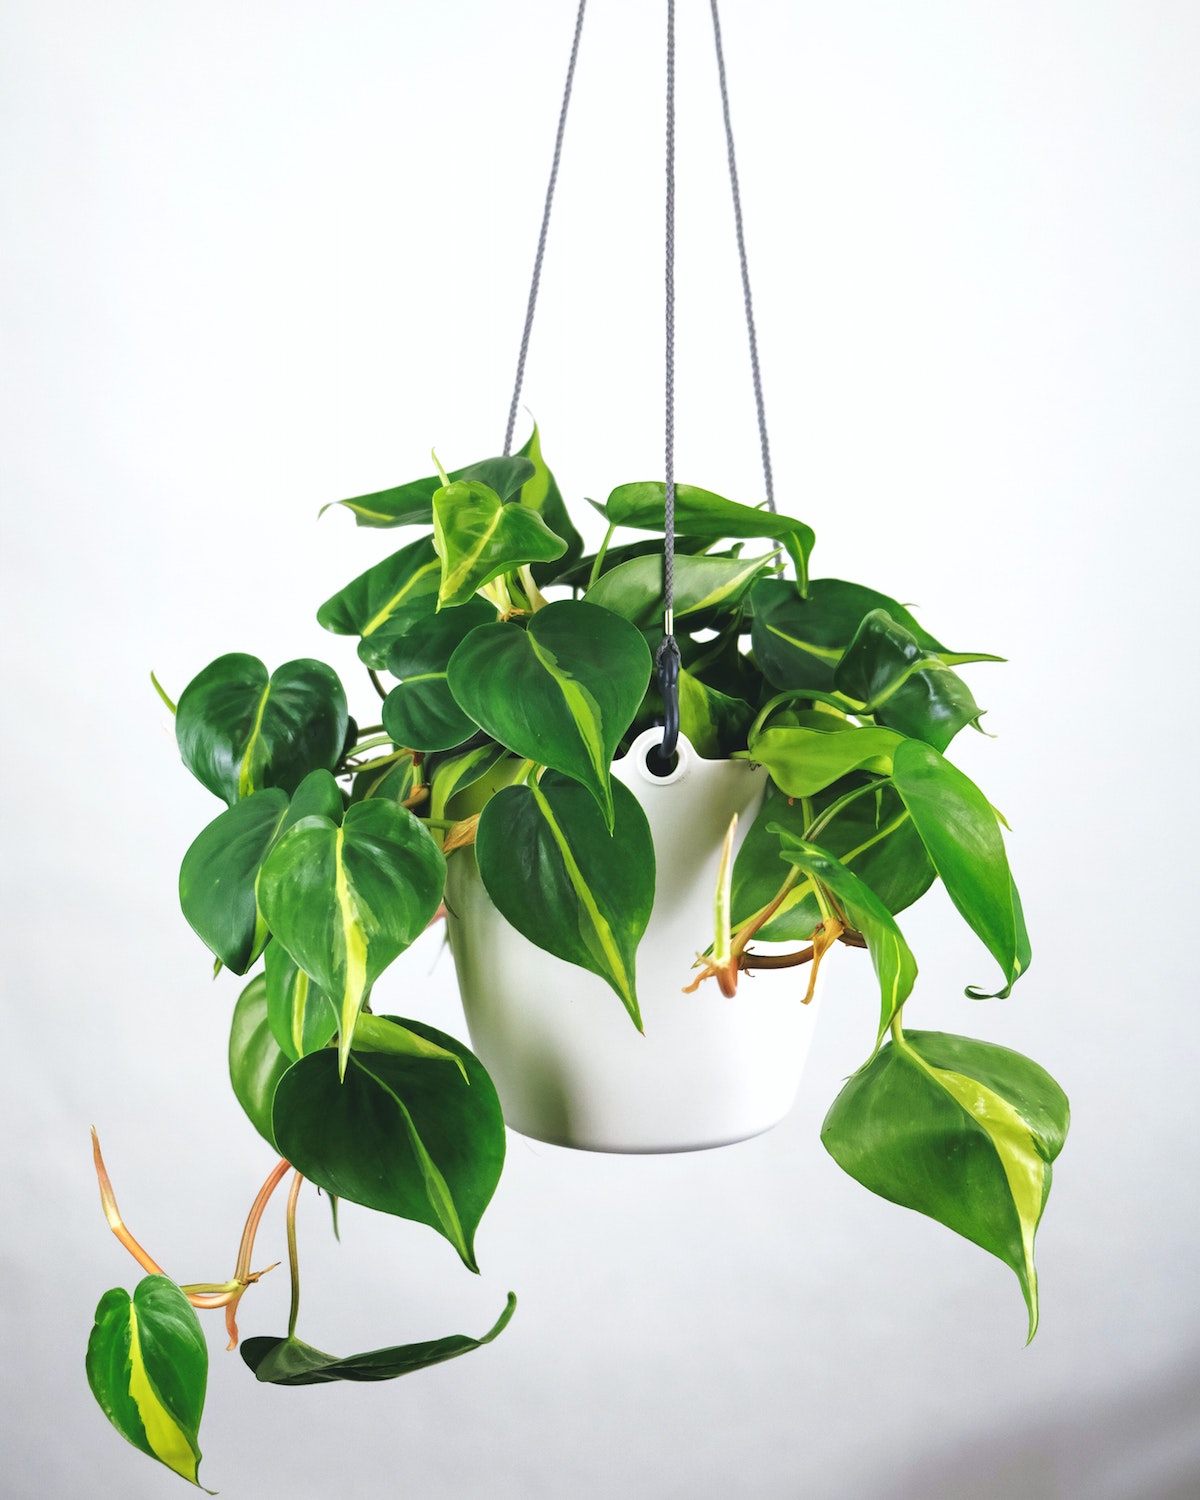 Philodendron Scandens Brazil